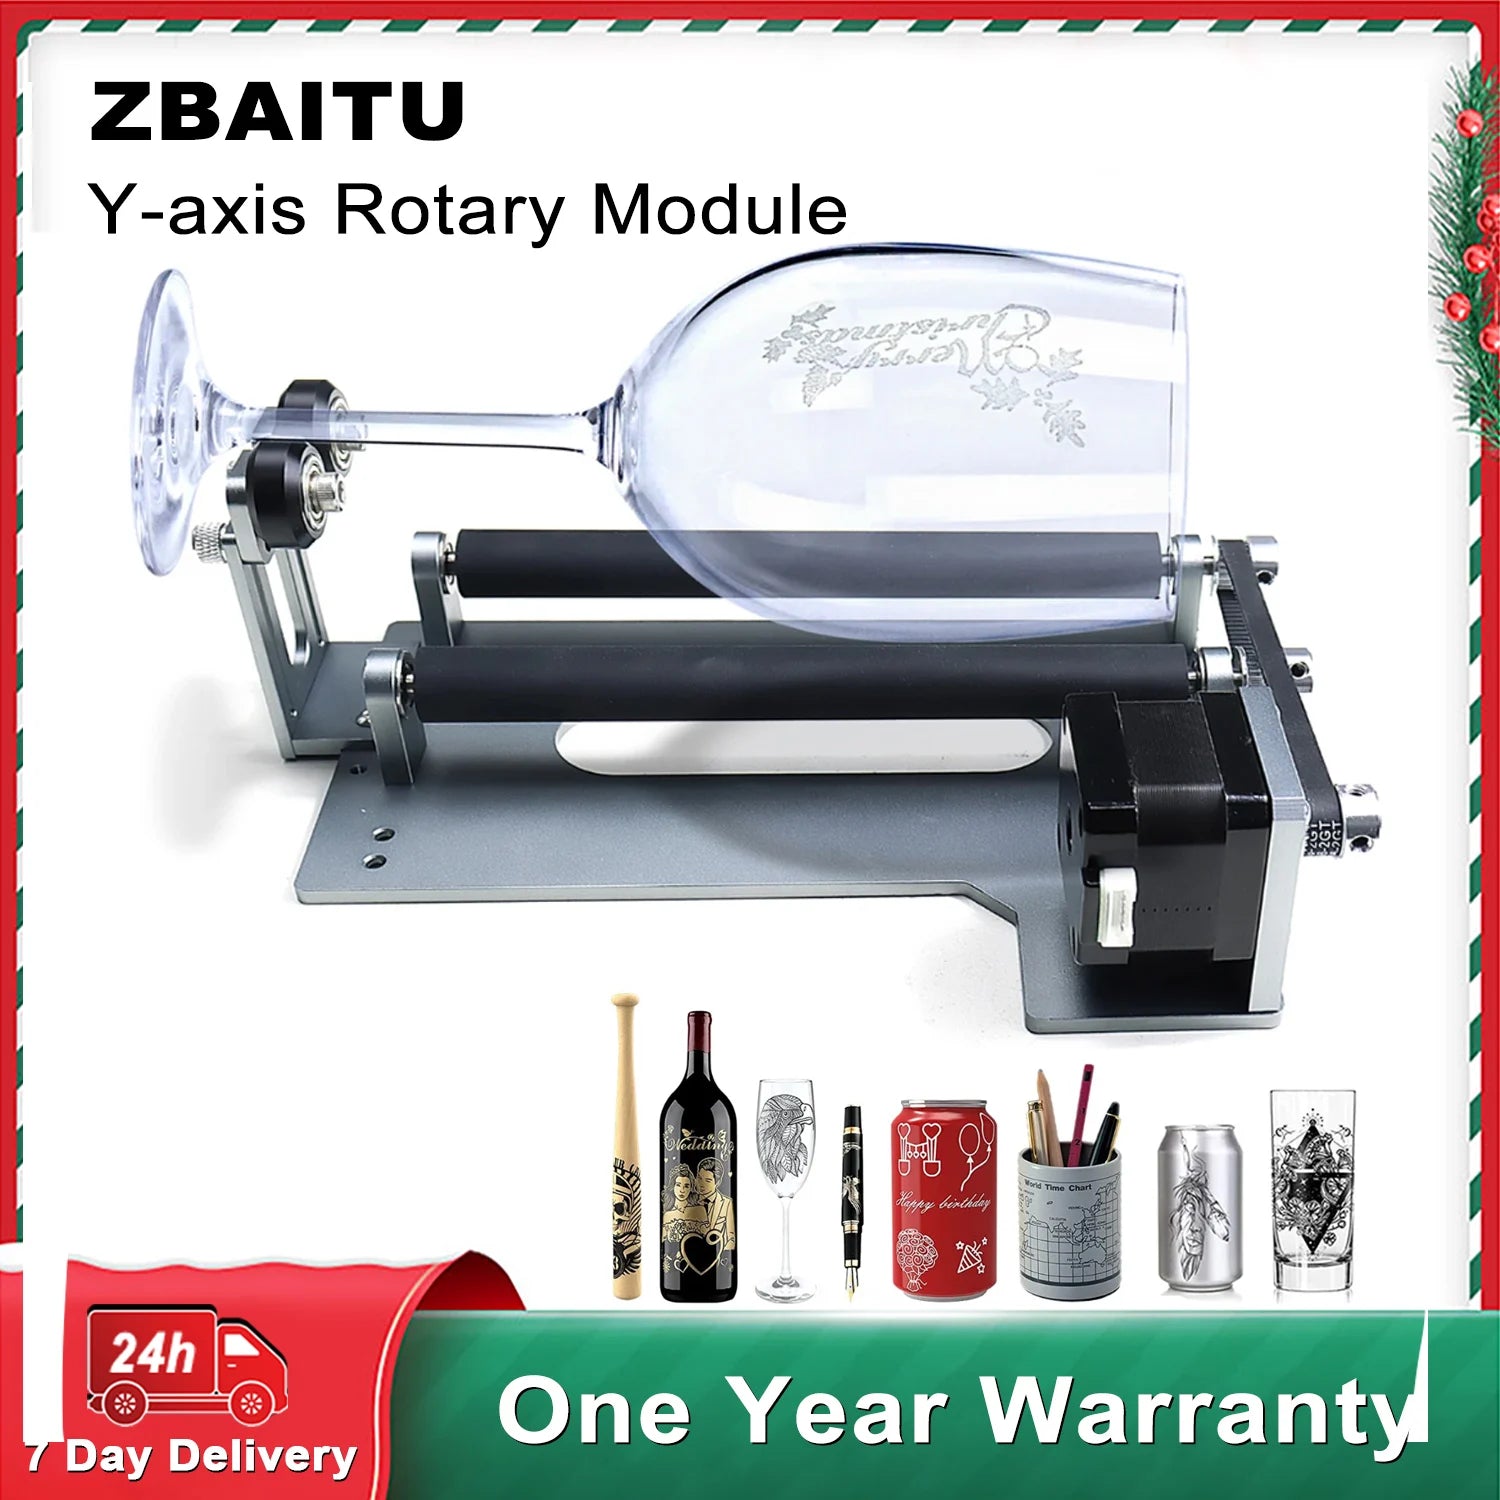 ZBAITU R10 Rotary Roller for Laser Engraver Woodworking Machines Y-axis 360° Rotating Engraving Cylindrical Objects Wine Glass